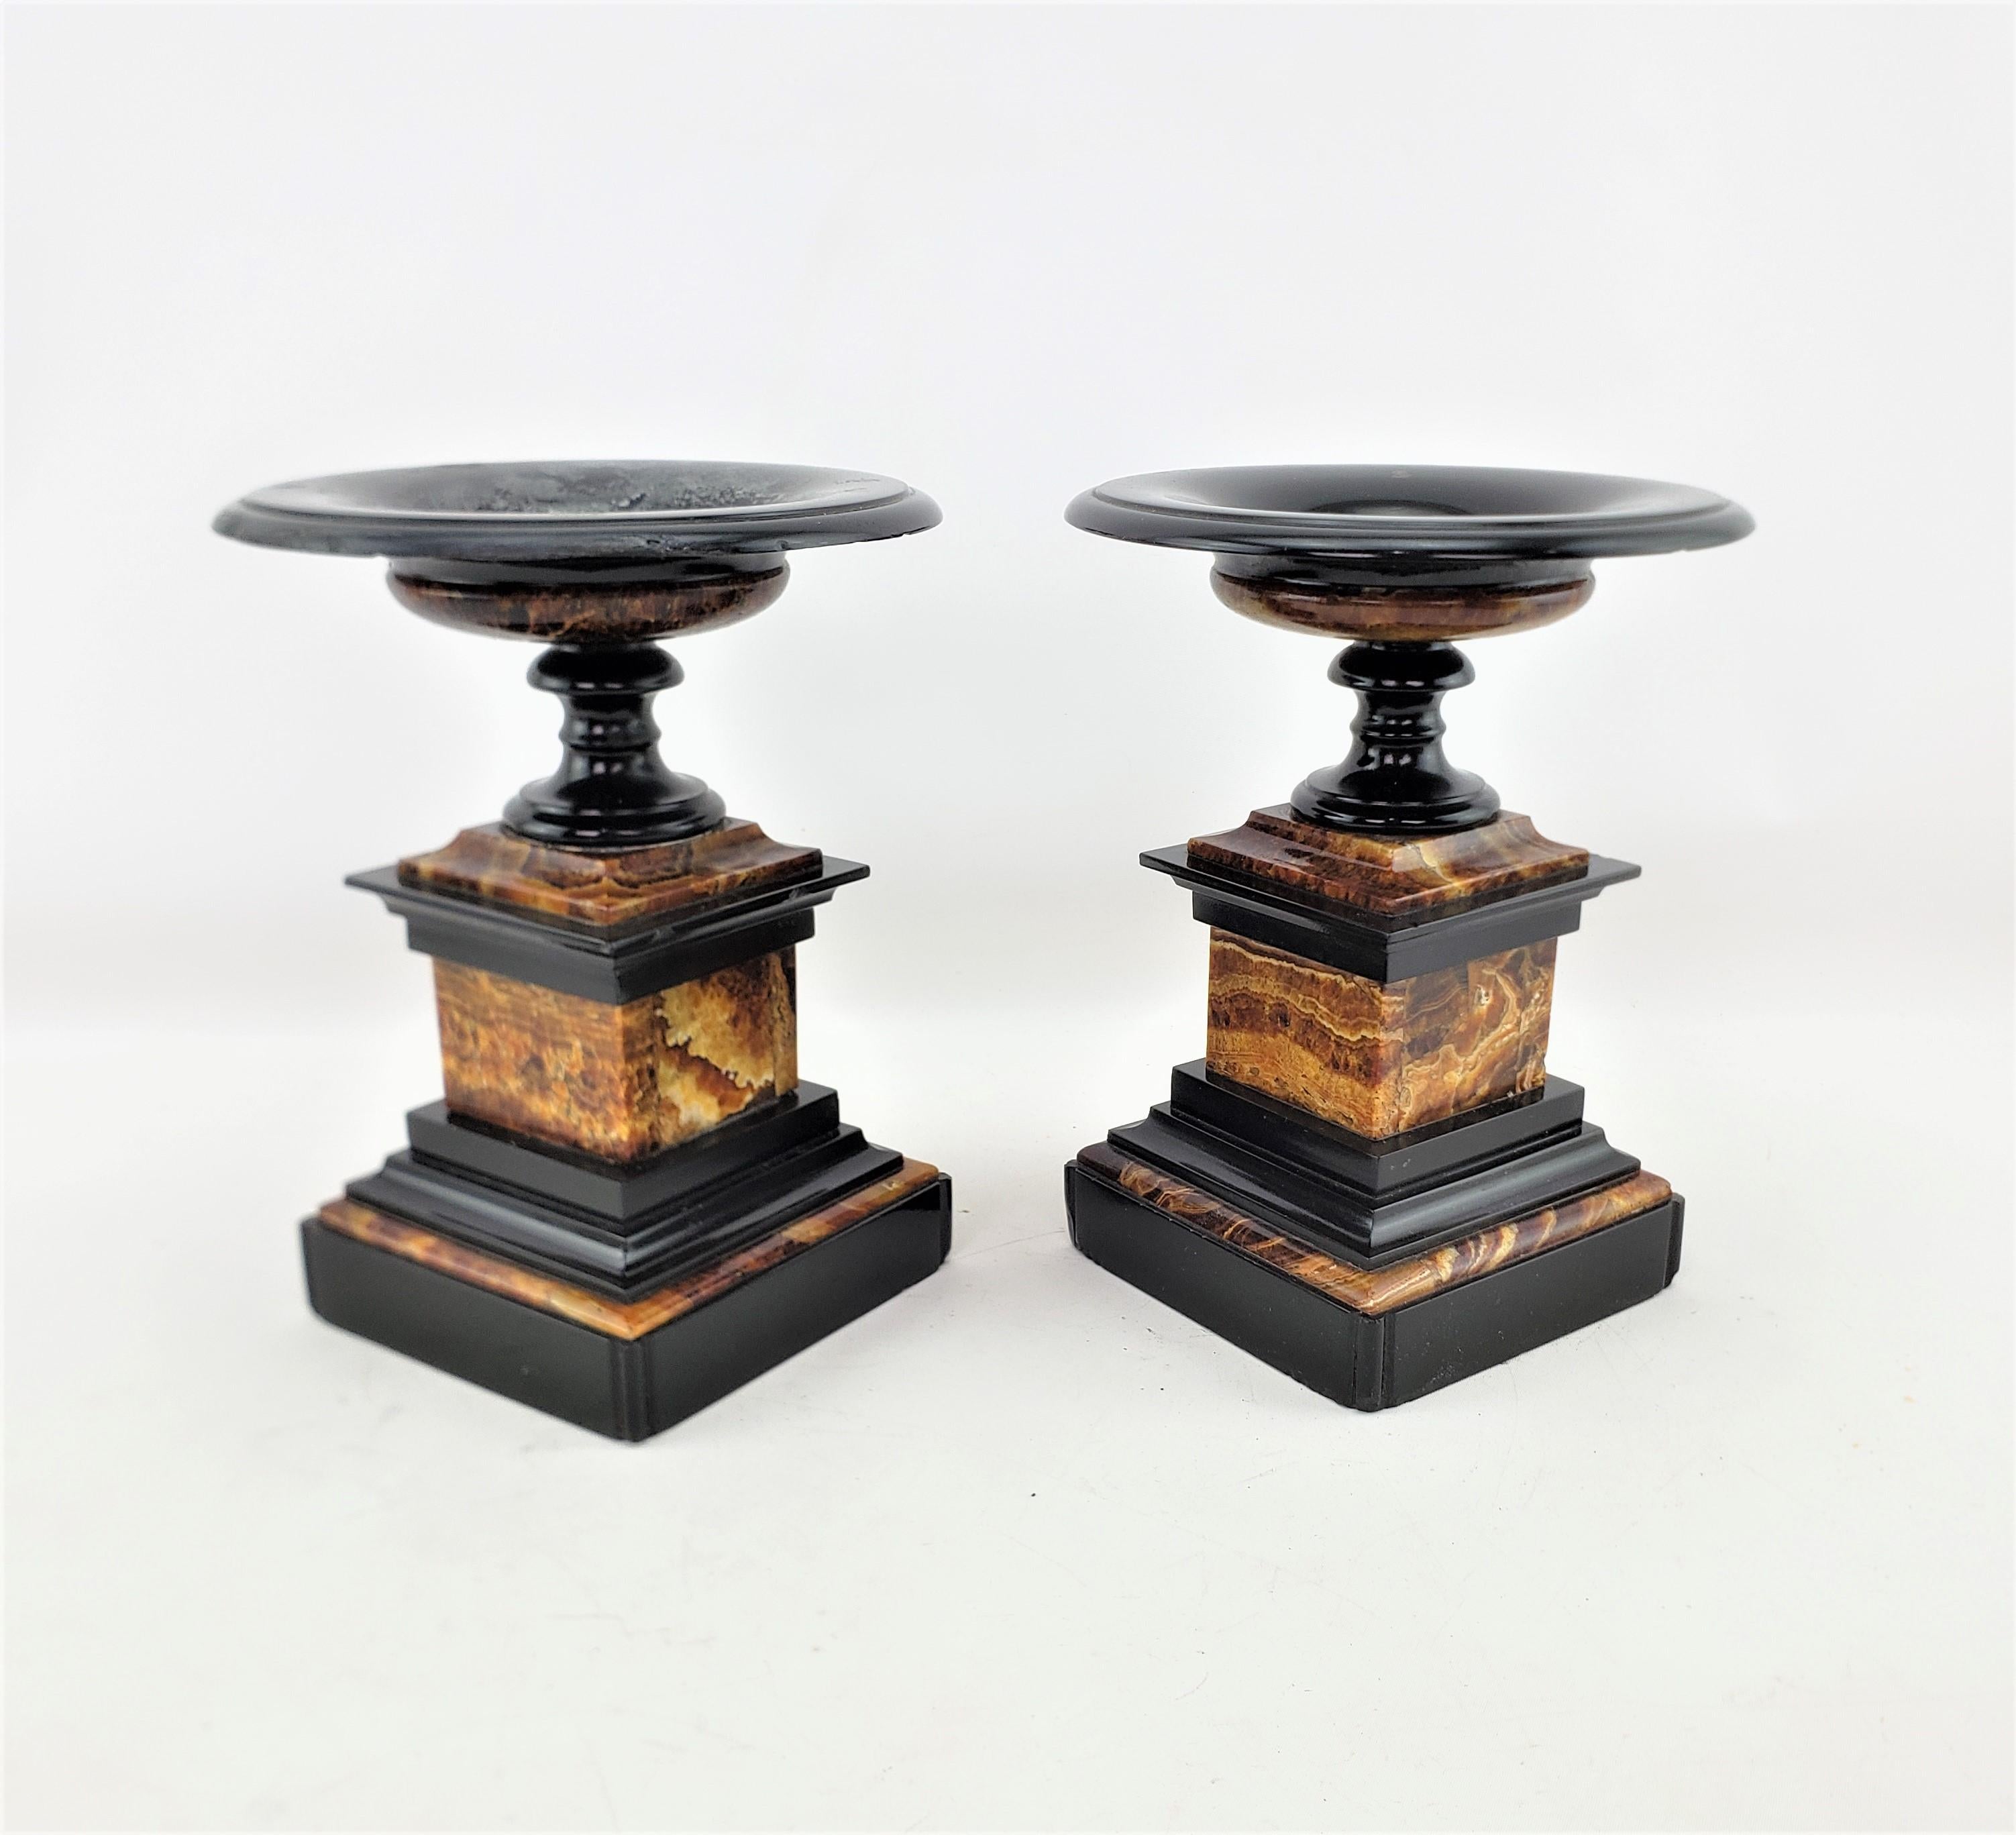 Pair of Antique French Polished Slate & Marble Garniture Set or Tazzas For Sale 4